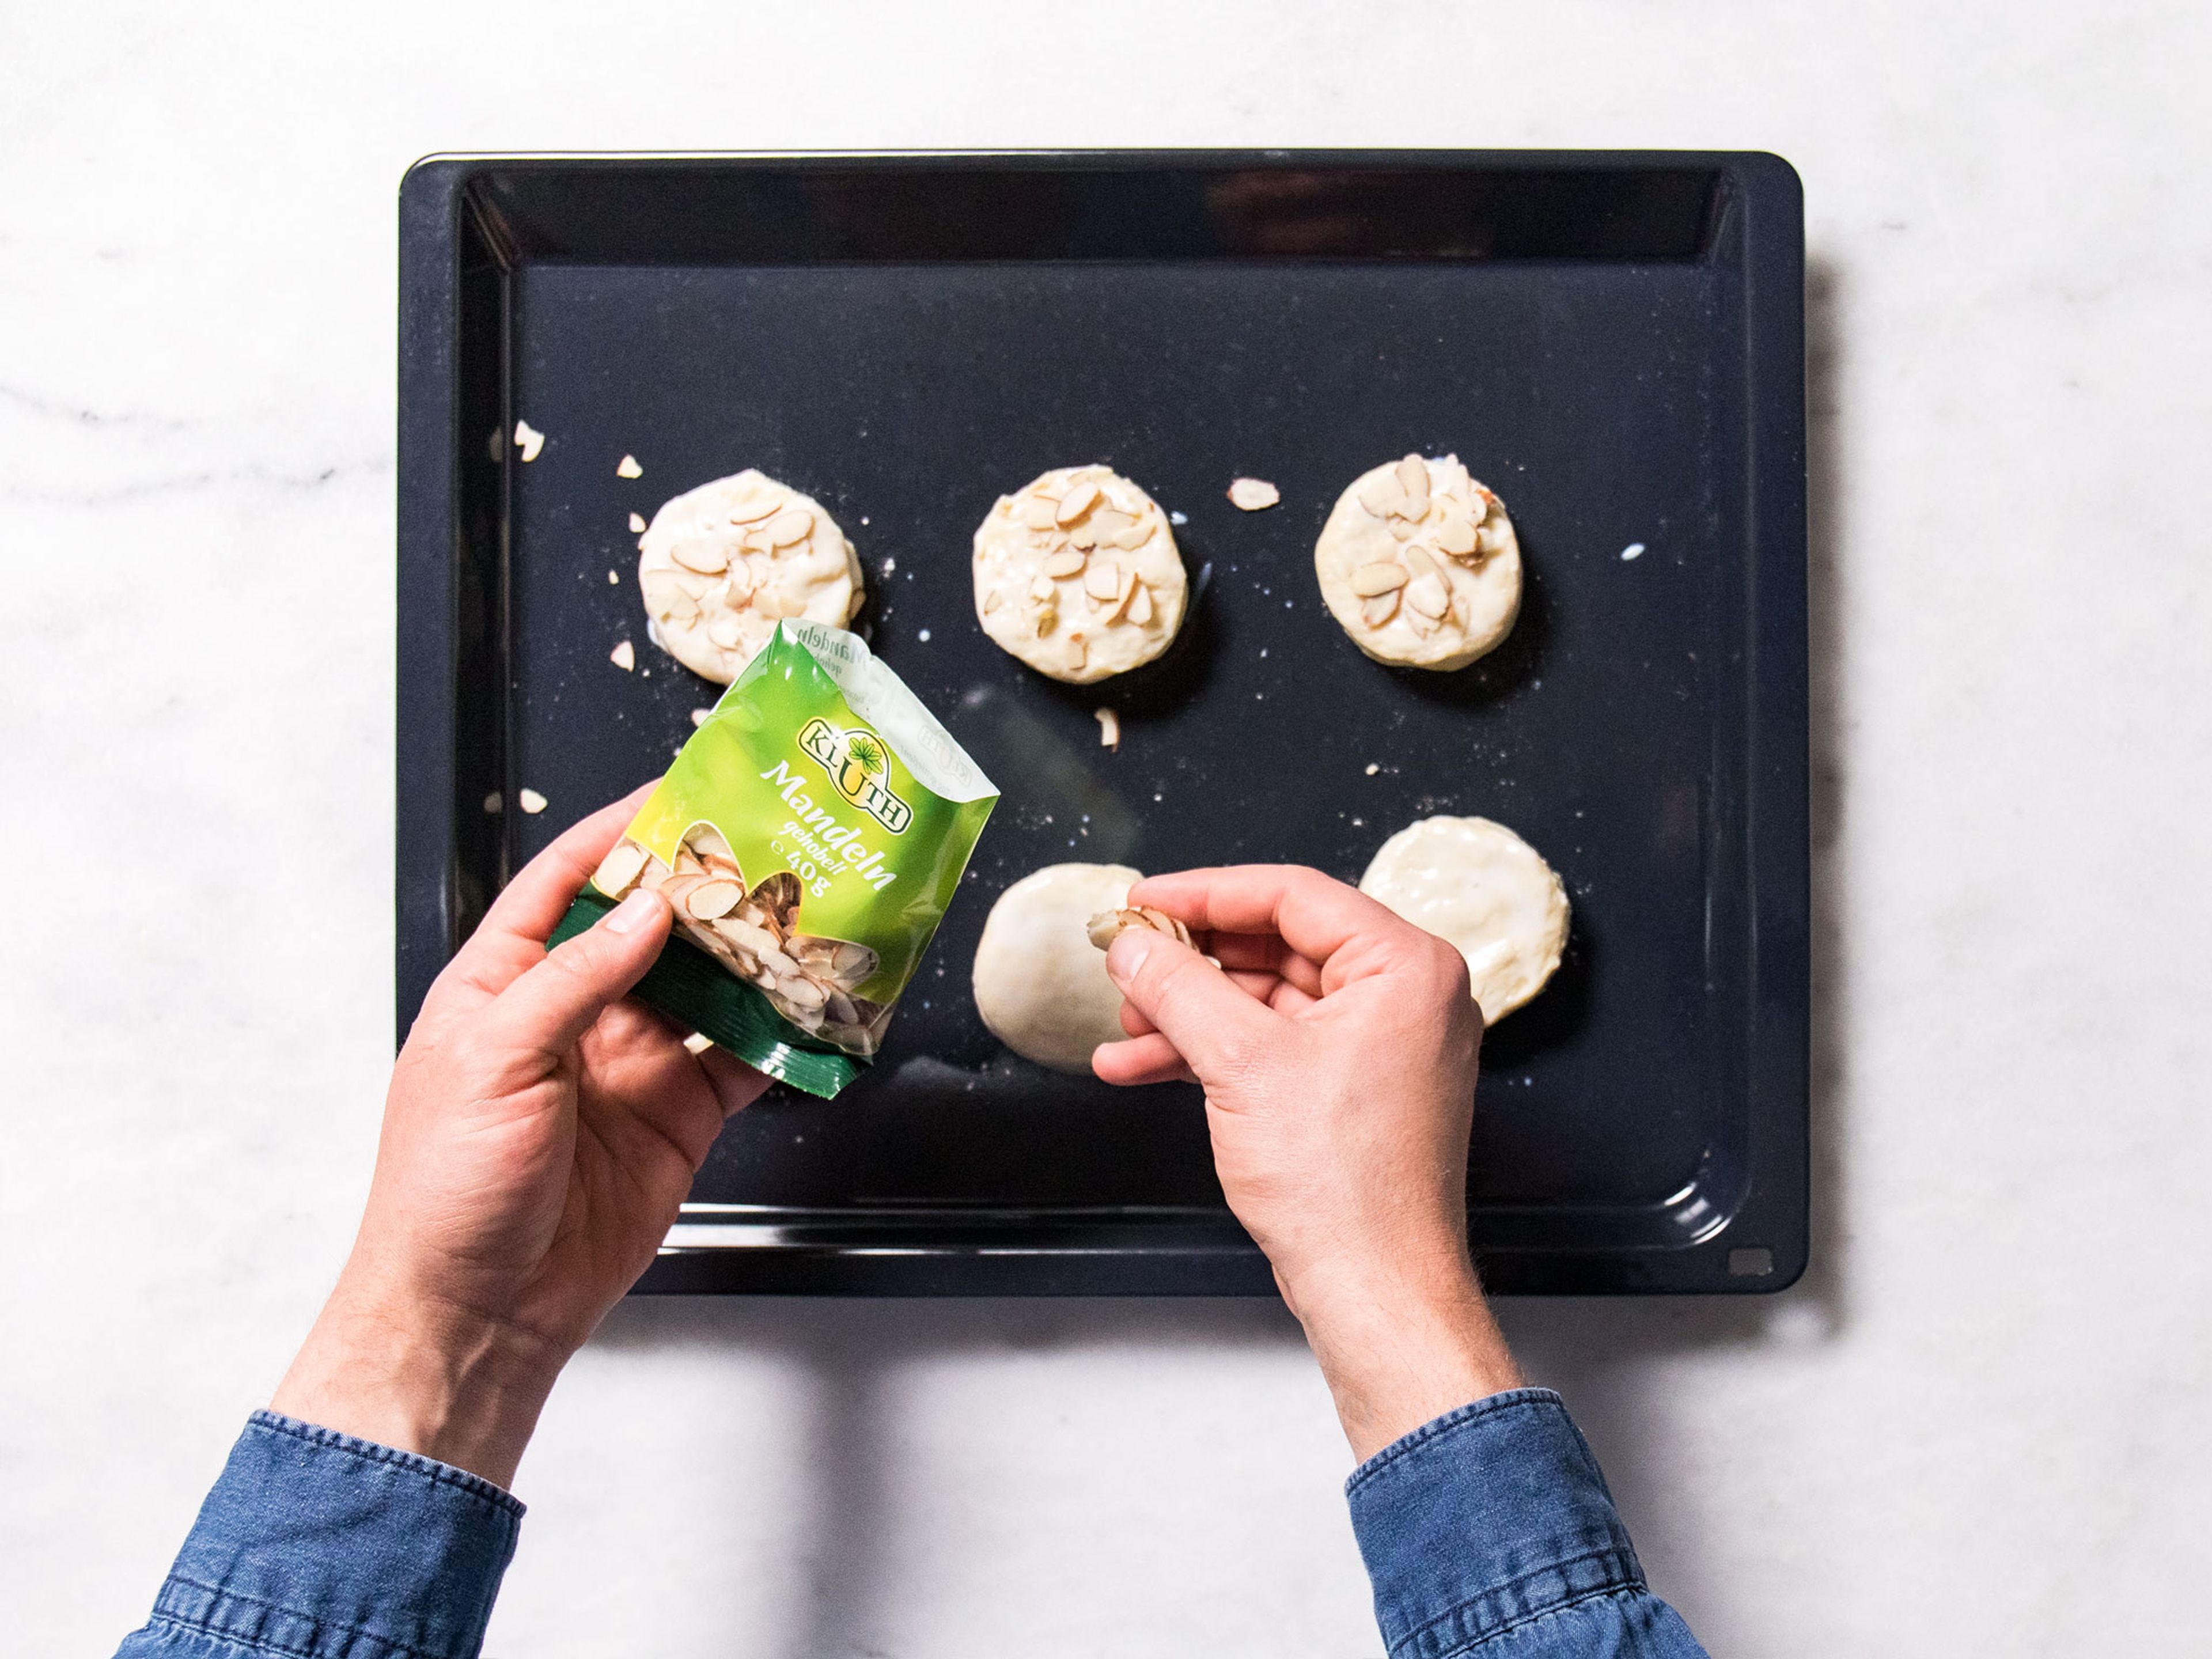 Roll out the dough with the rolling pin to a thickness of 2.5 - 3cm. Cut out the biscuits and transfer them to a baking sheet. Brush biscuits with some buttermilk, sprinkle with almonds, and bake for 15 min.